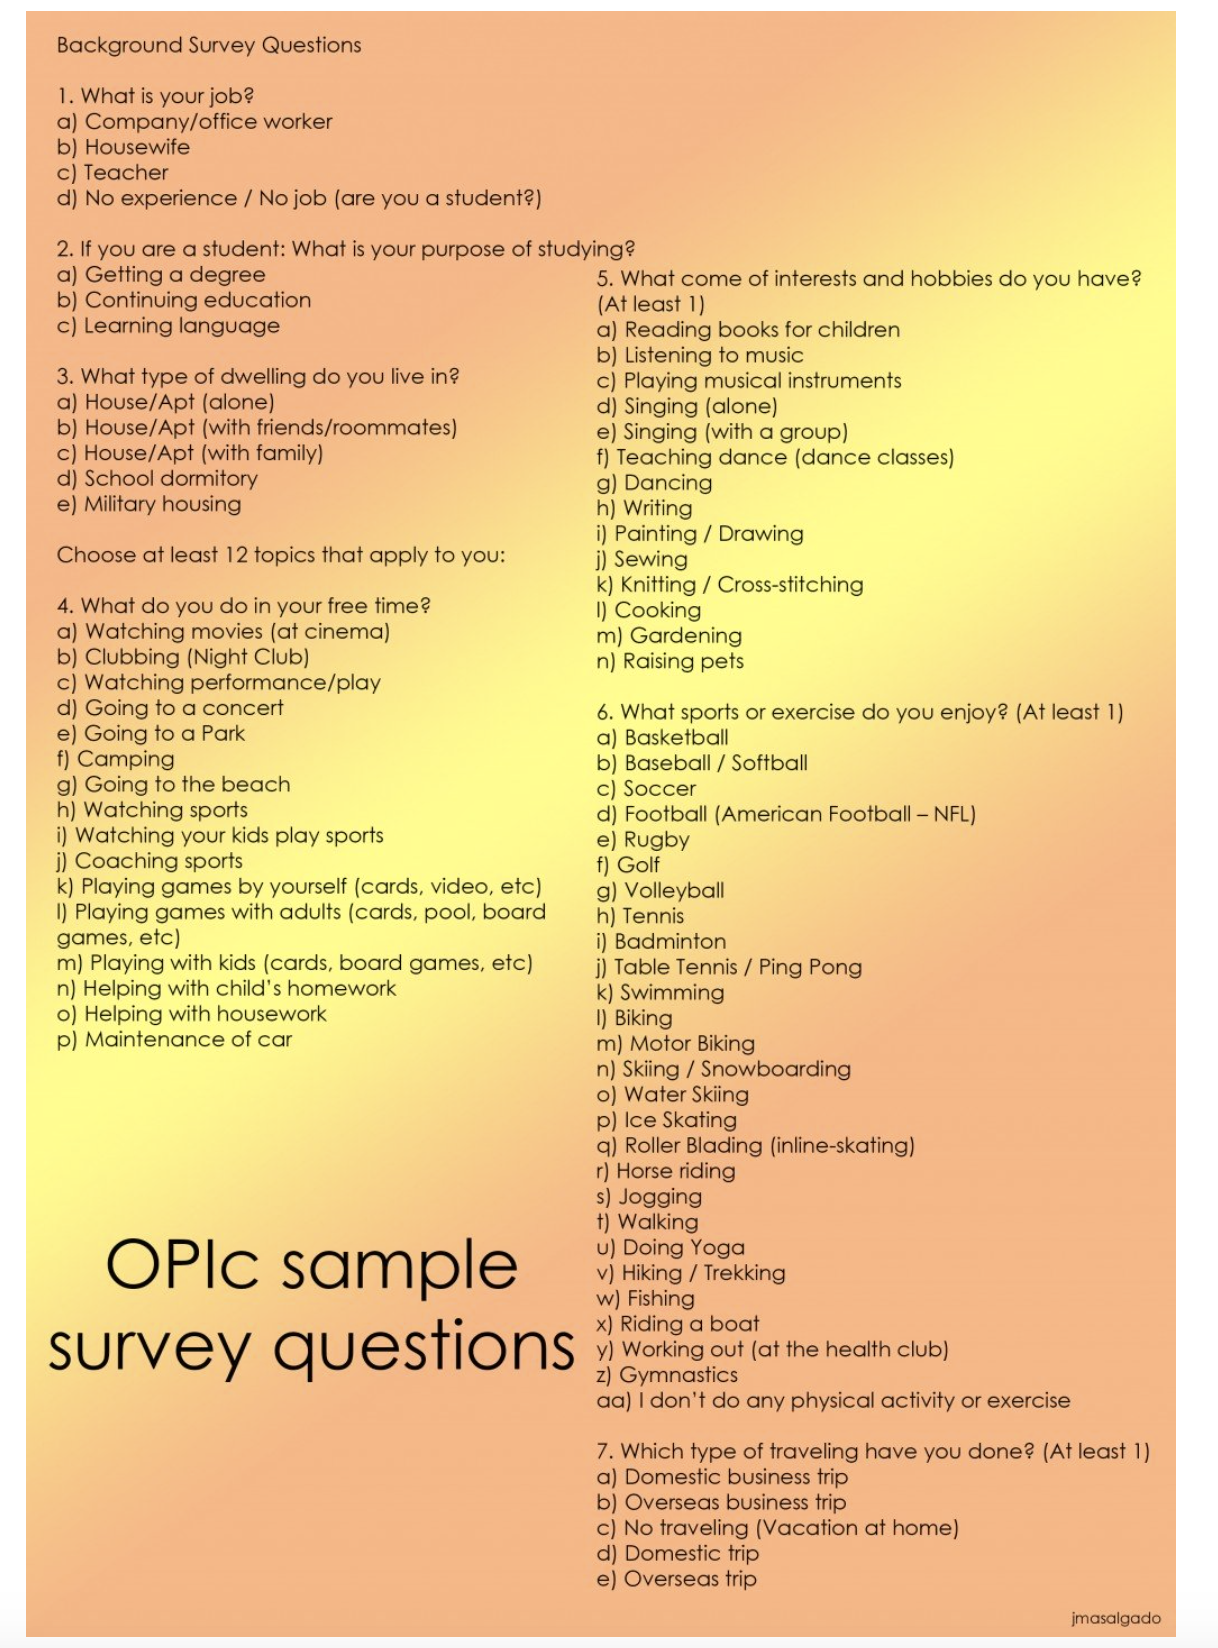 opic survey questions